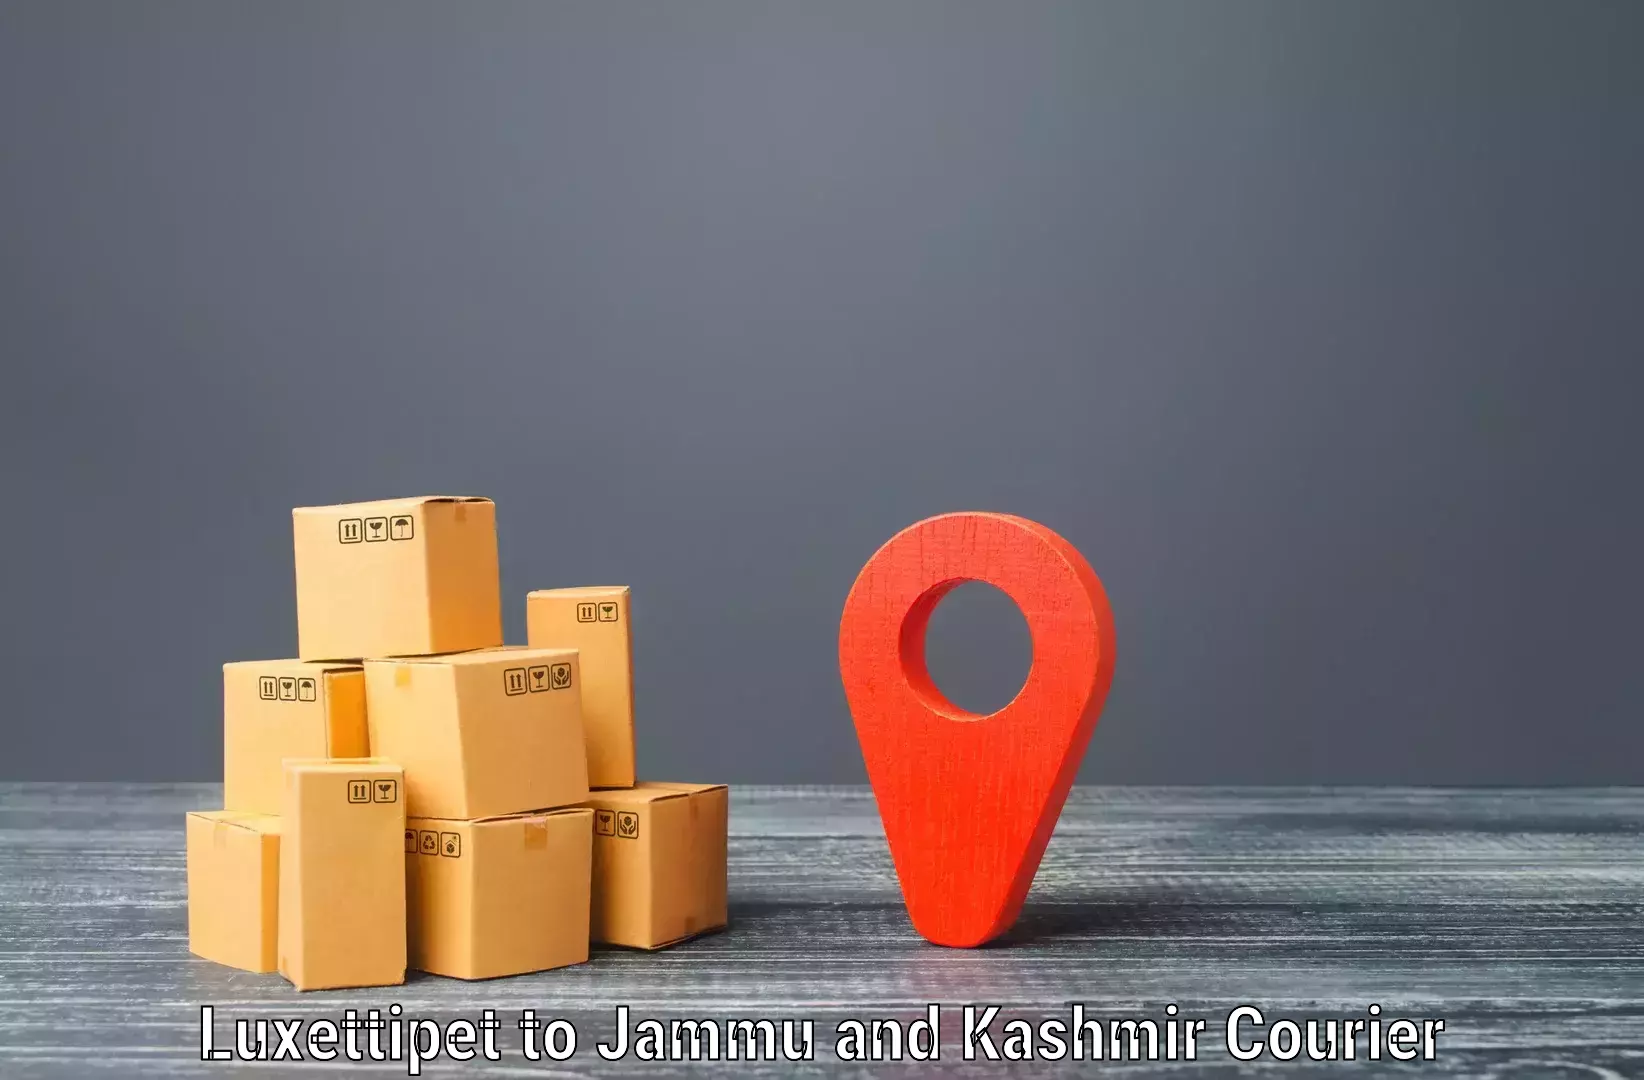 Efficient parcel tracking Luxettipet to Jammu and Kashmir